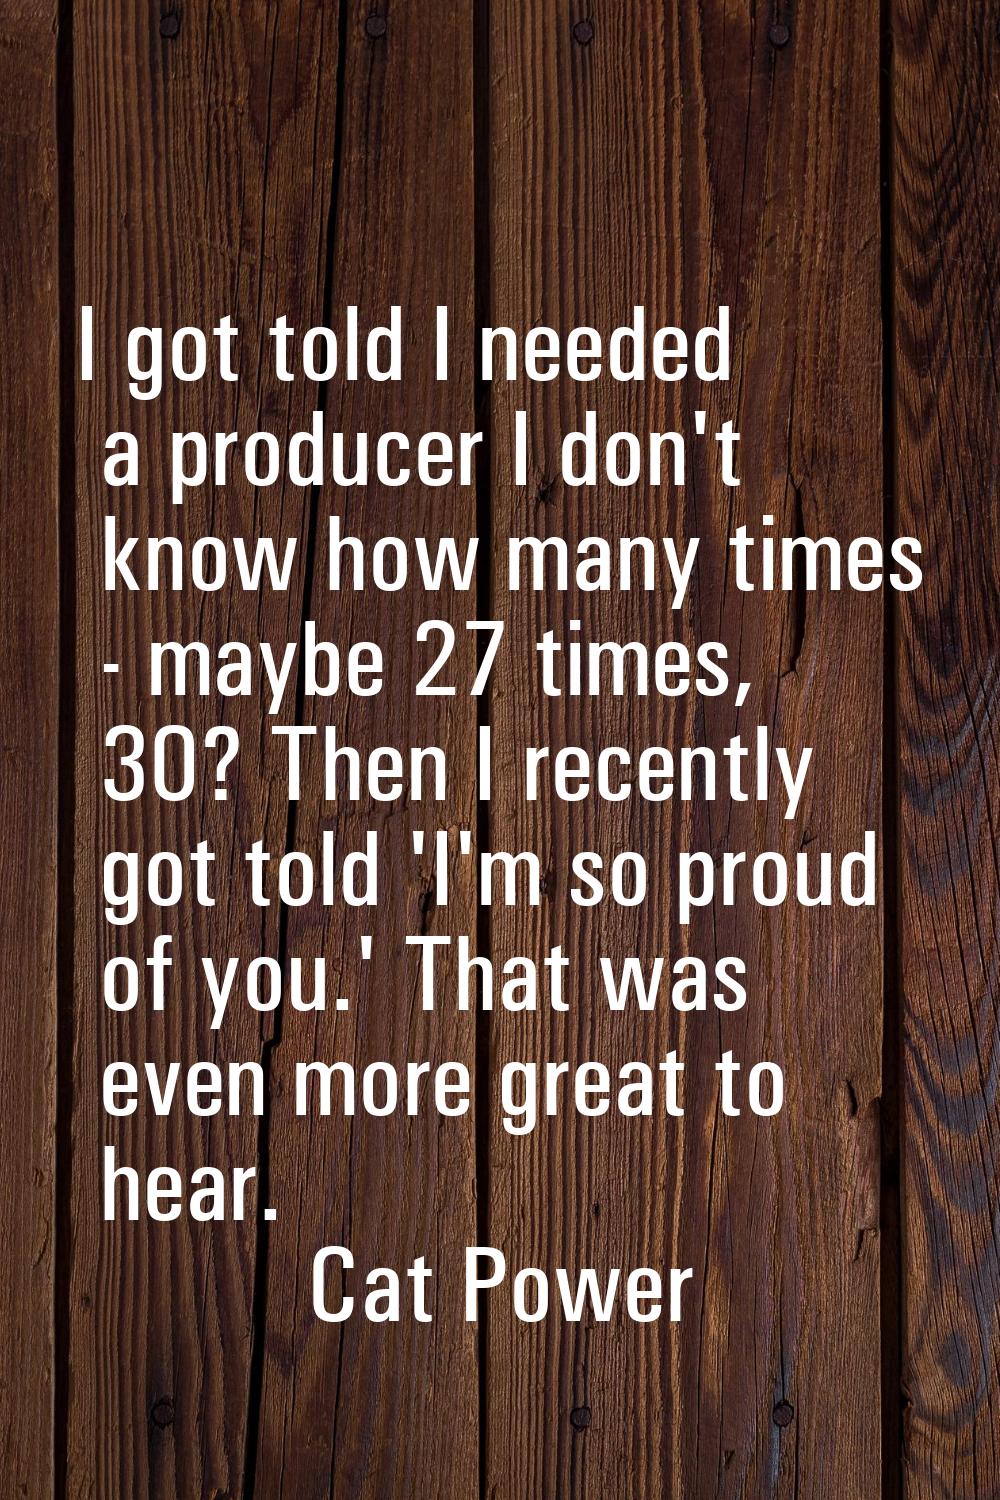 I got told I needed a producer I don't know how many times - maybe 27 times, 30? Then I recently go